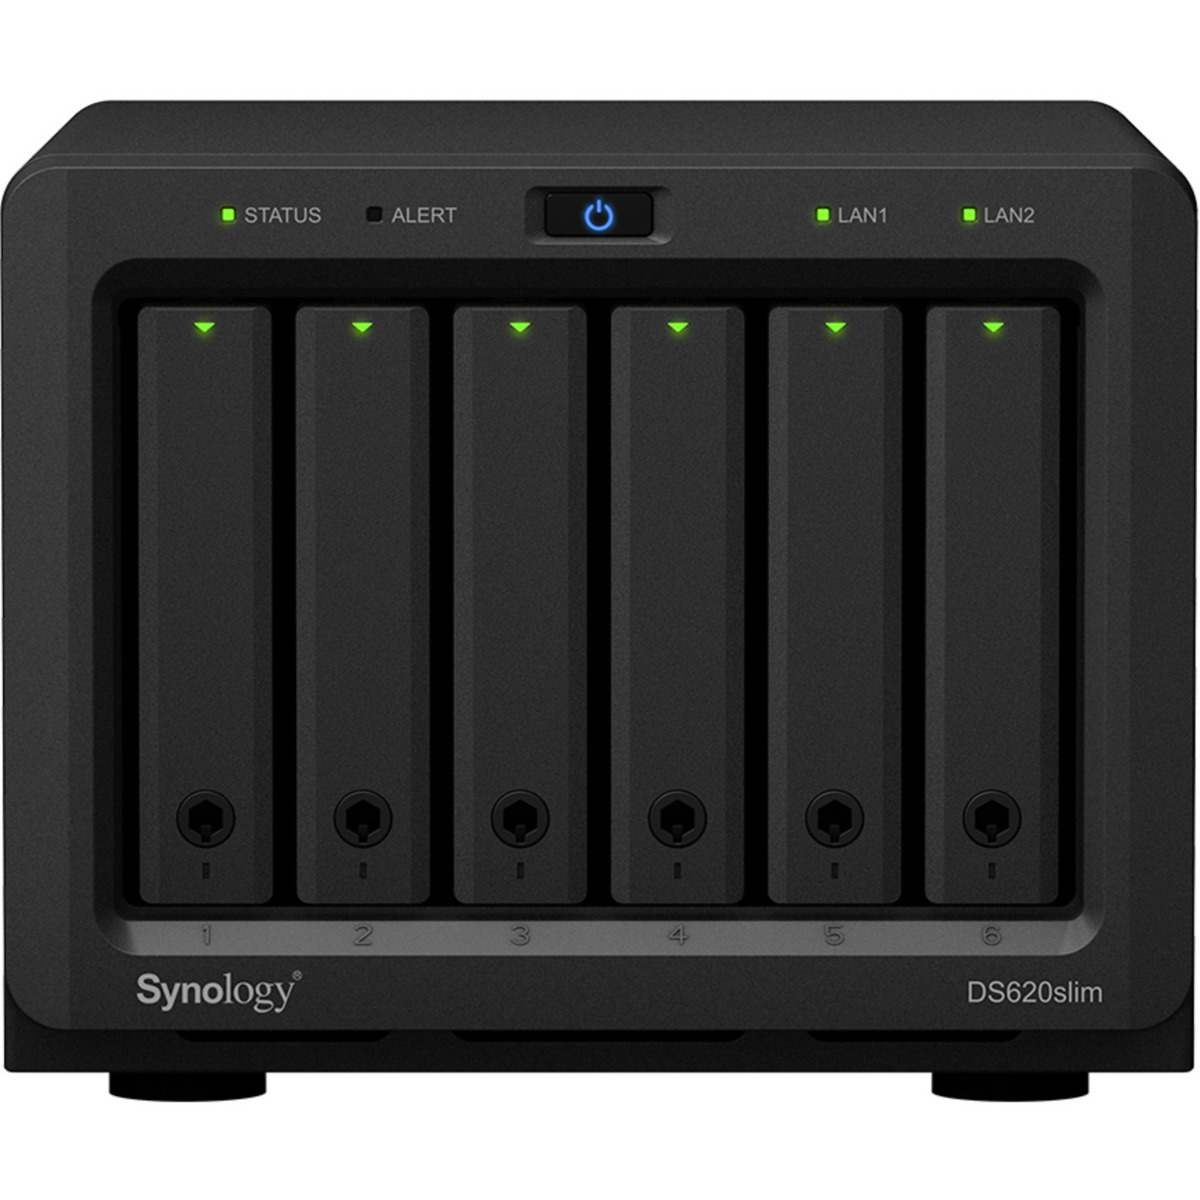 Synology DiskStation DS620slim 28tb 6-Bay Desktop Multimedia / Power User / Business NAS - Network Attached Storage Device 4x7tb Synology SAT5210 Series SAT5210-7000G 2.5 530/500MB/s SATA 6Gb/s SSD ENTERPRISE Class Drives Installed - Burn-In Tested - FREE RAM UPGRADE DiskStation DS620slim